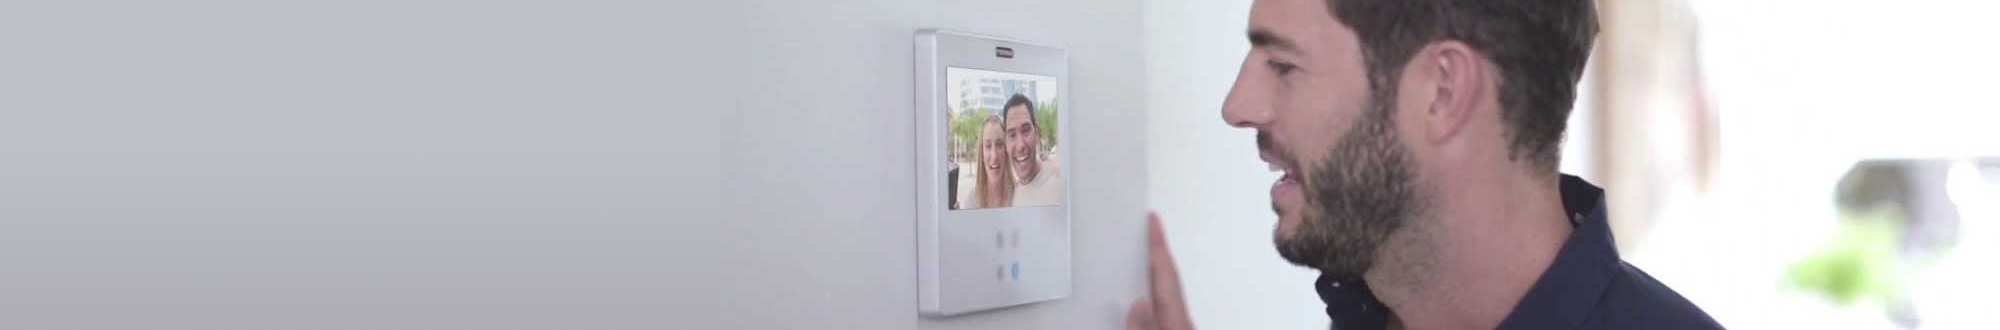 Intercom System for Homes and Apartments